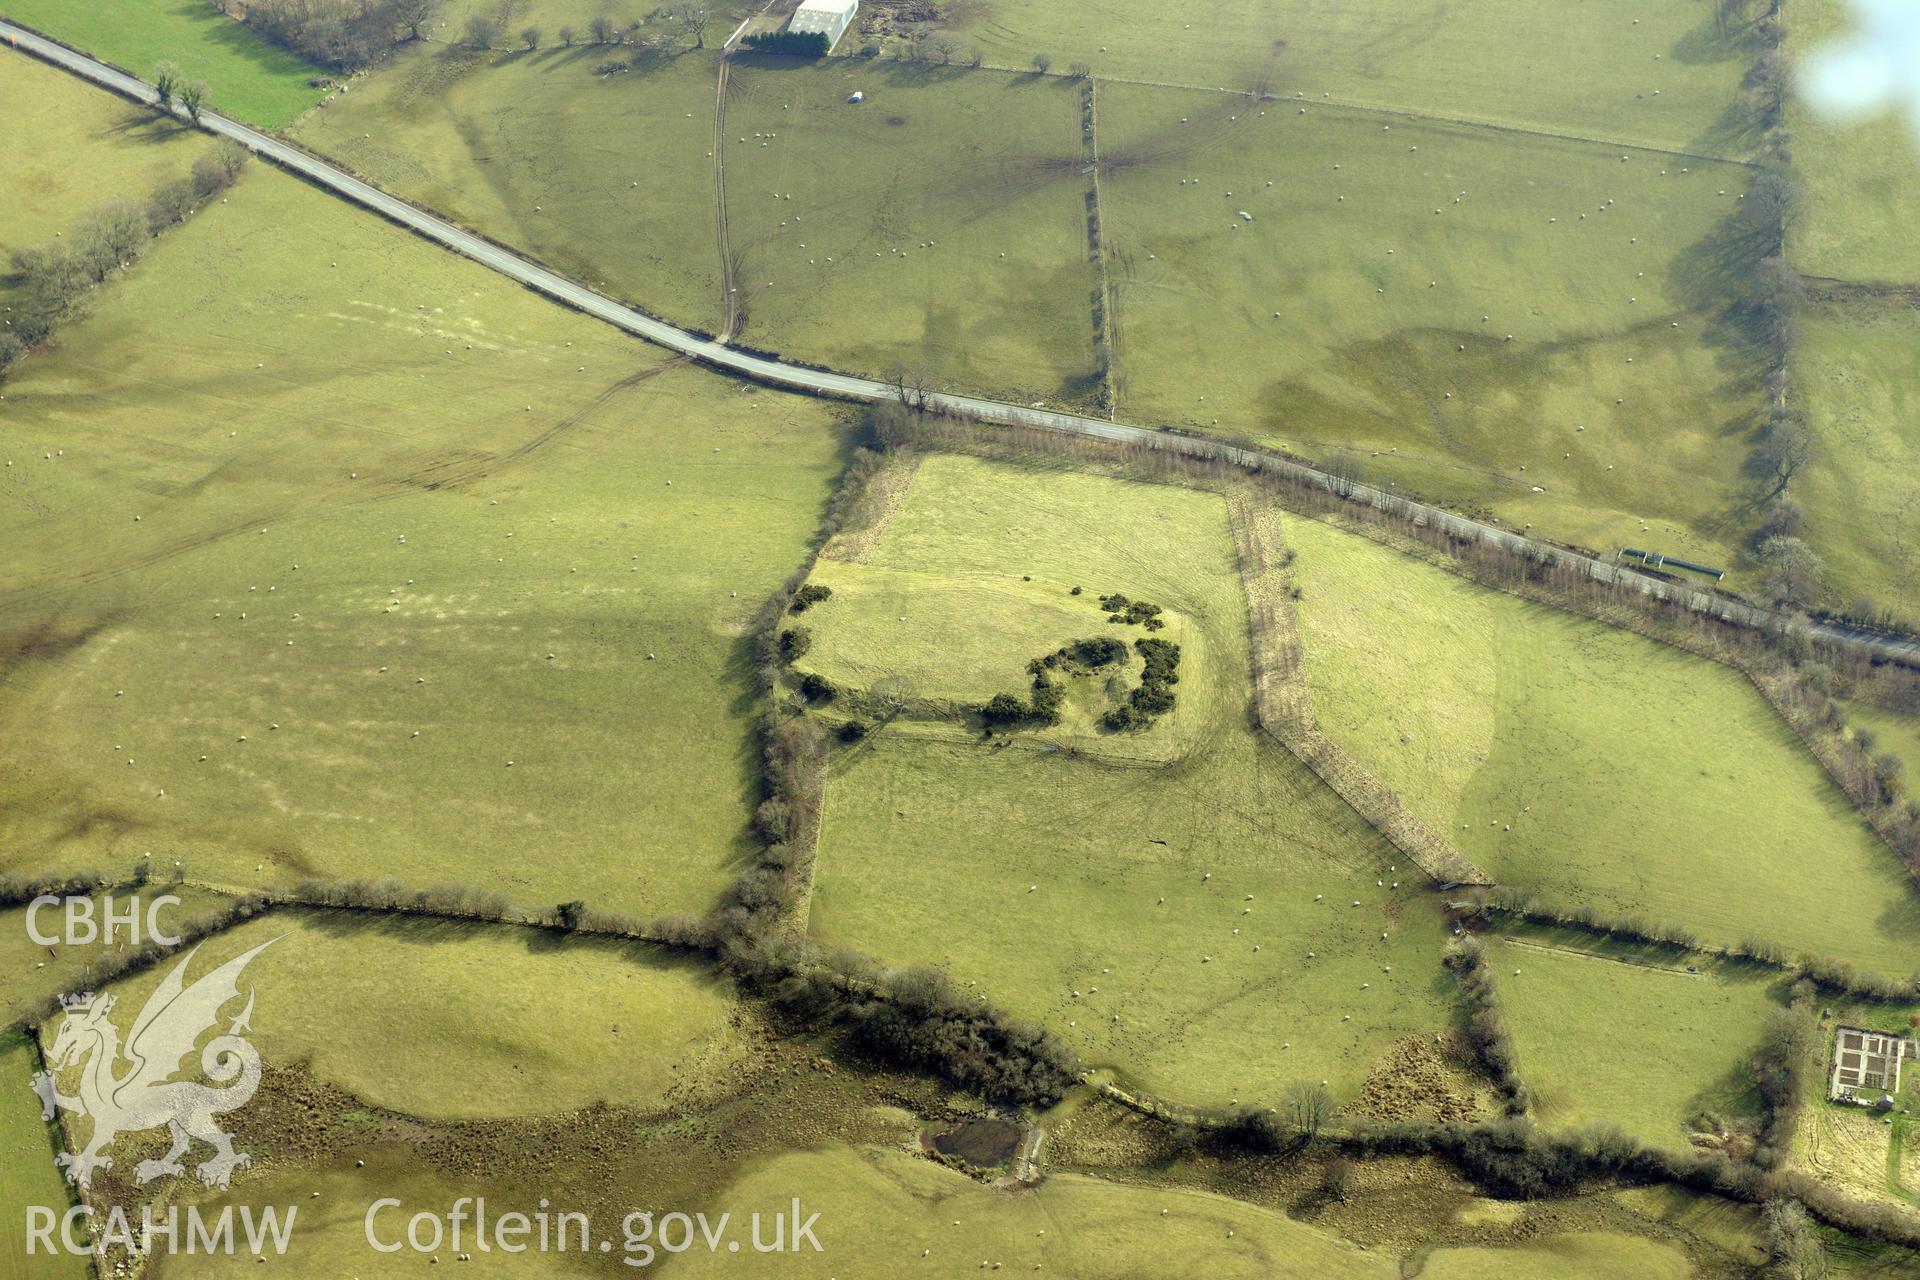 Moel Fodig hillfort, north east of Corwen. Oblique aerial photograph taken during the Royal Commission?s programme of archaeological aerial reconnaissance by Toby Driver on 28th February 2013.